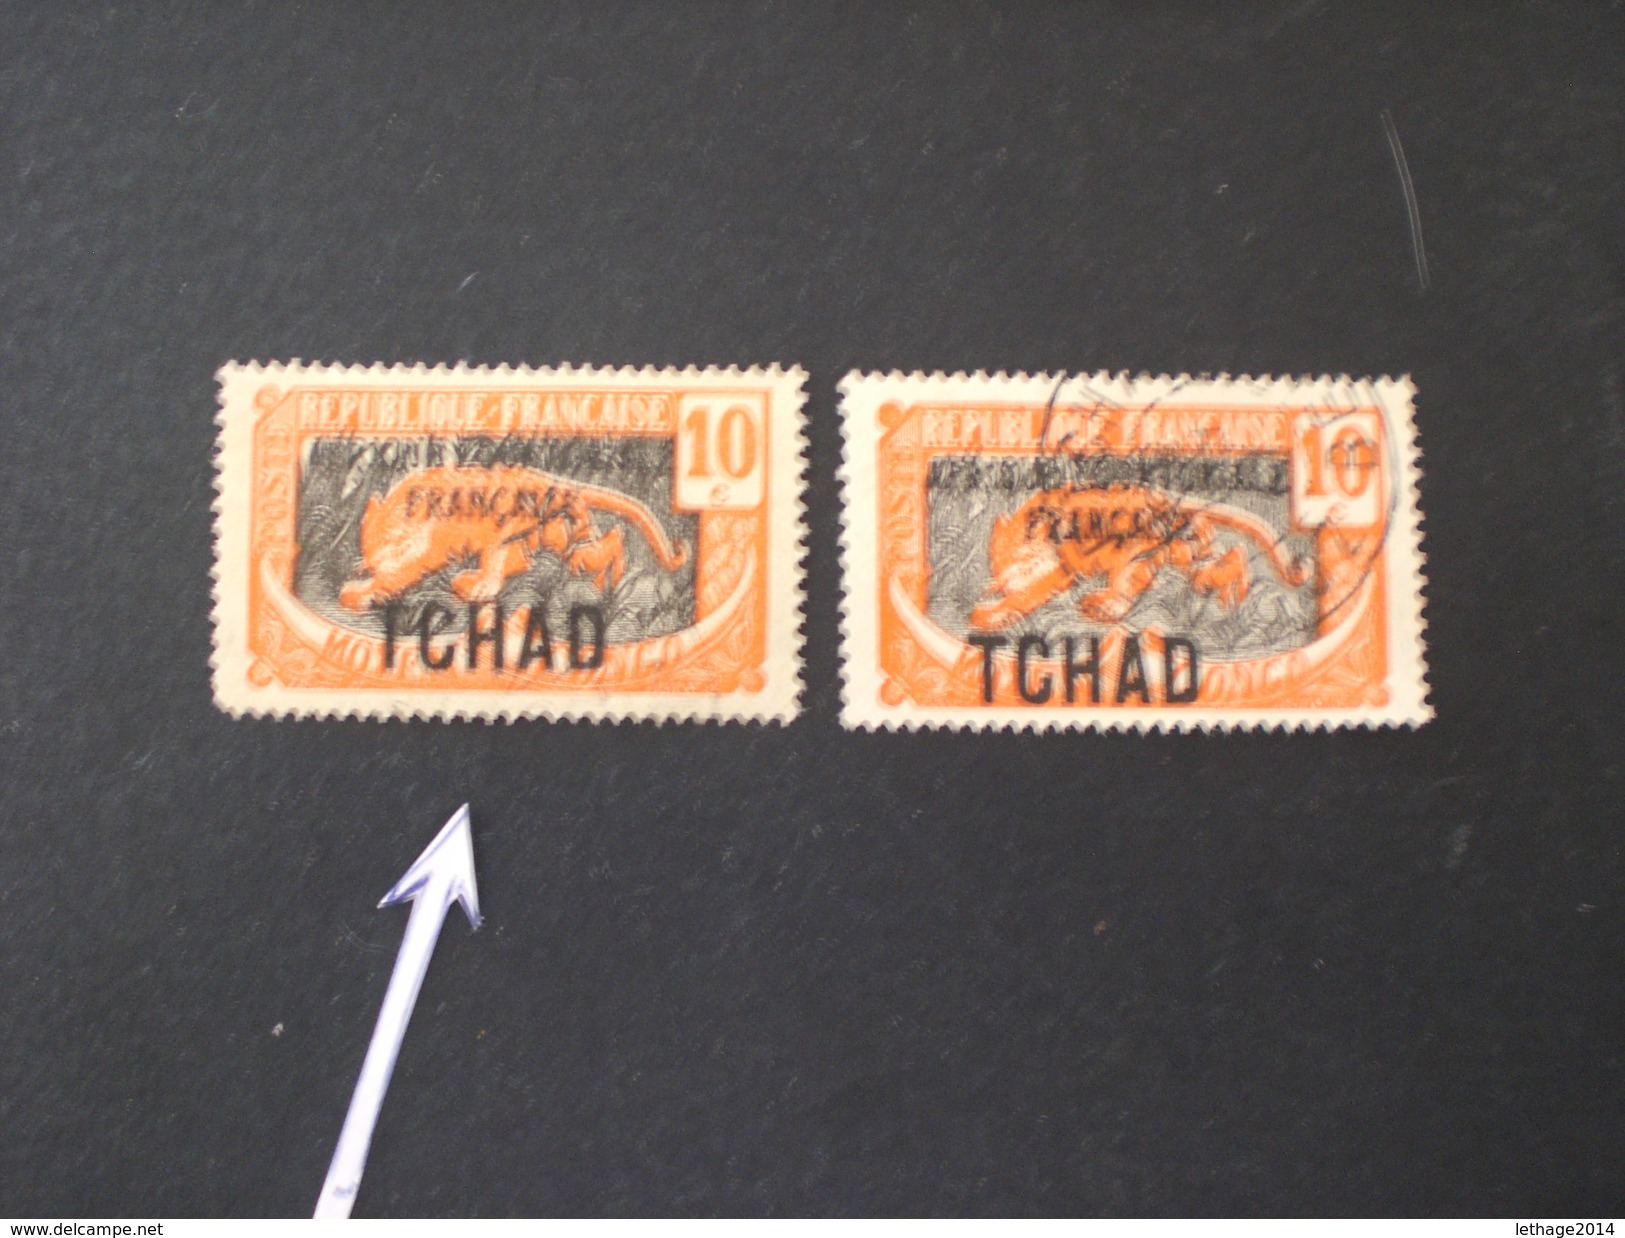 TCHAD CHAD 1925 Panthere Overprinted "AFRIQUE EQUATORIALE FRANCAISE" Color Error Is Not Gray But Black - Used Stamps